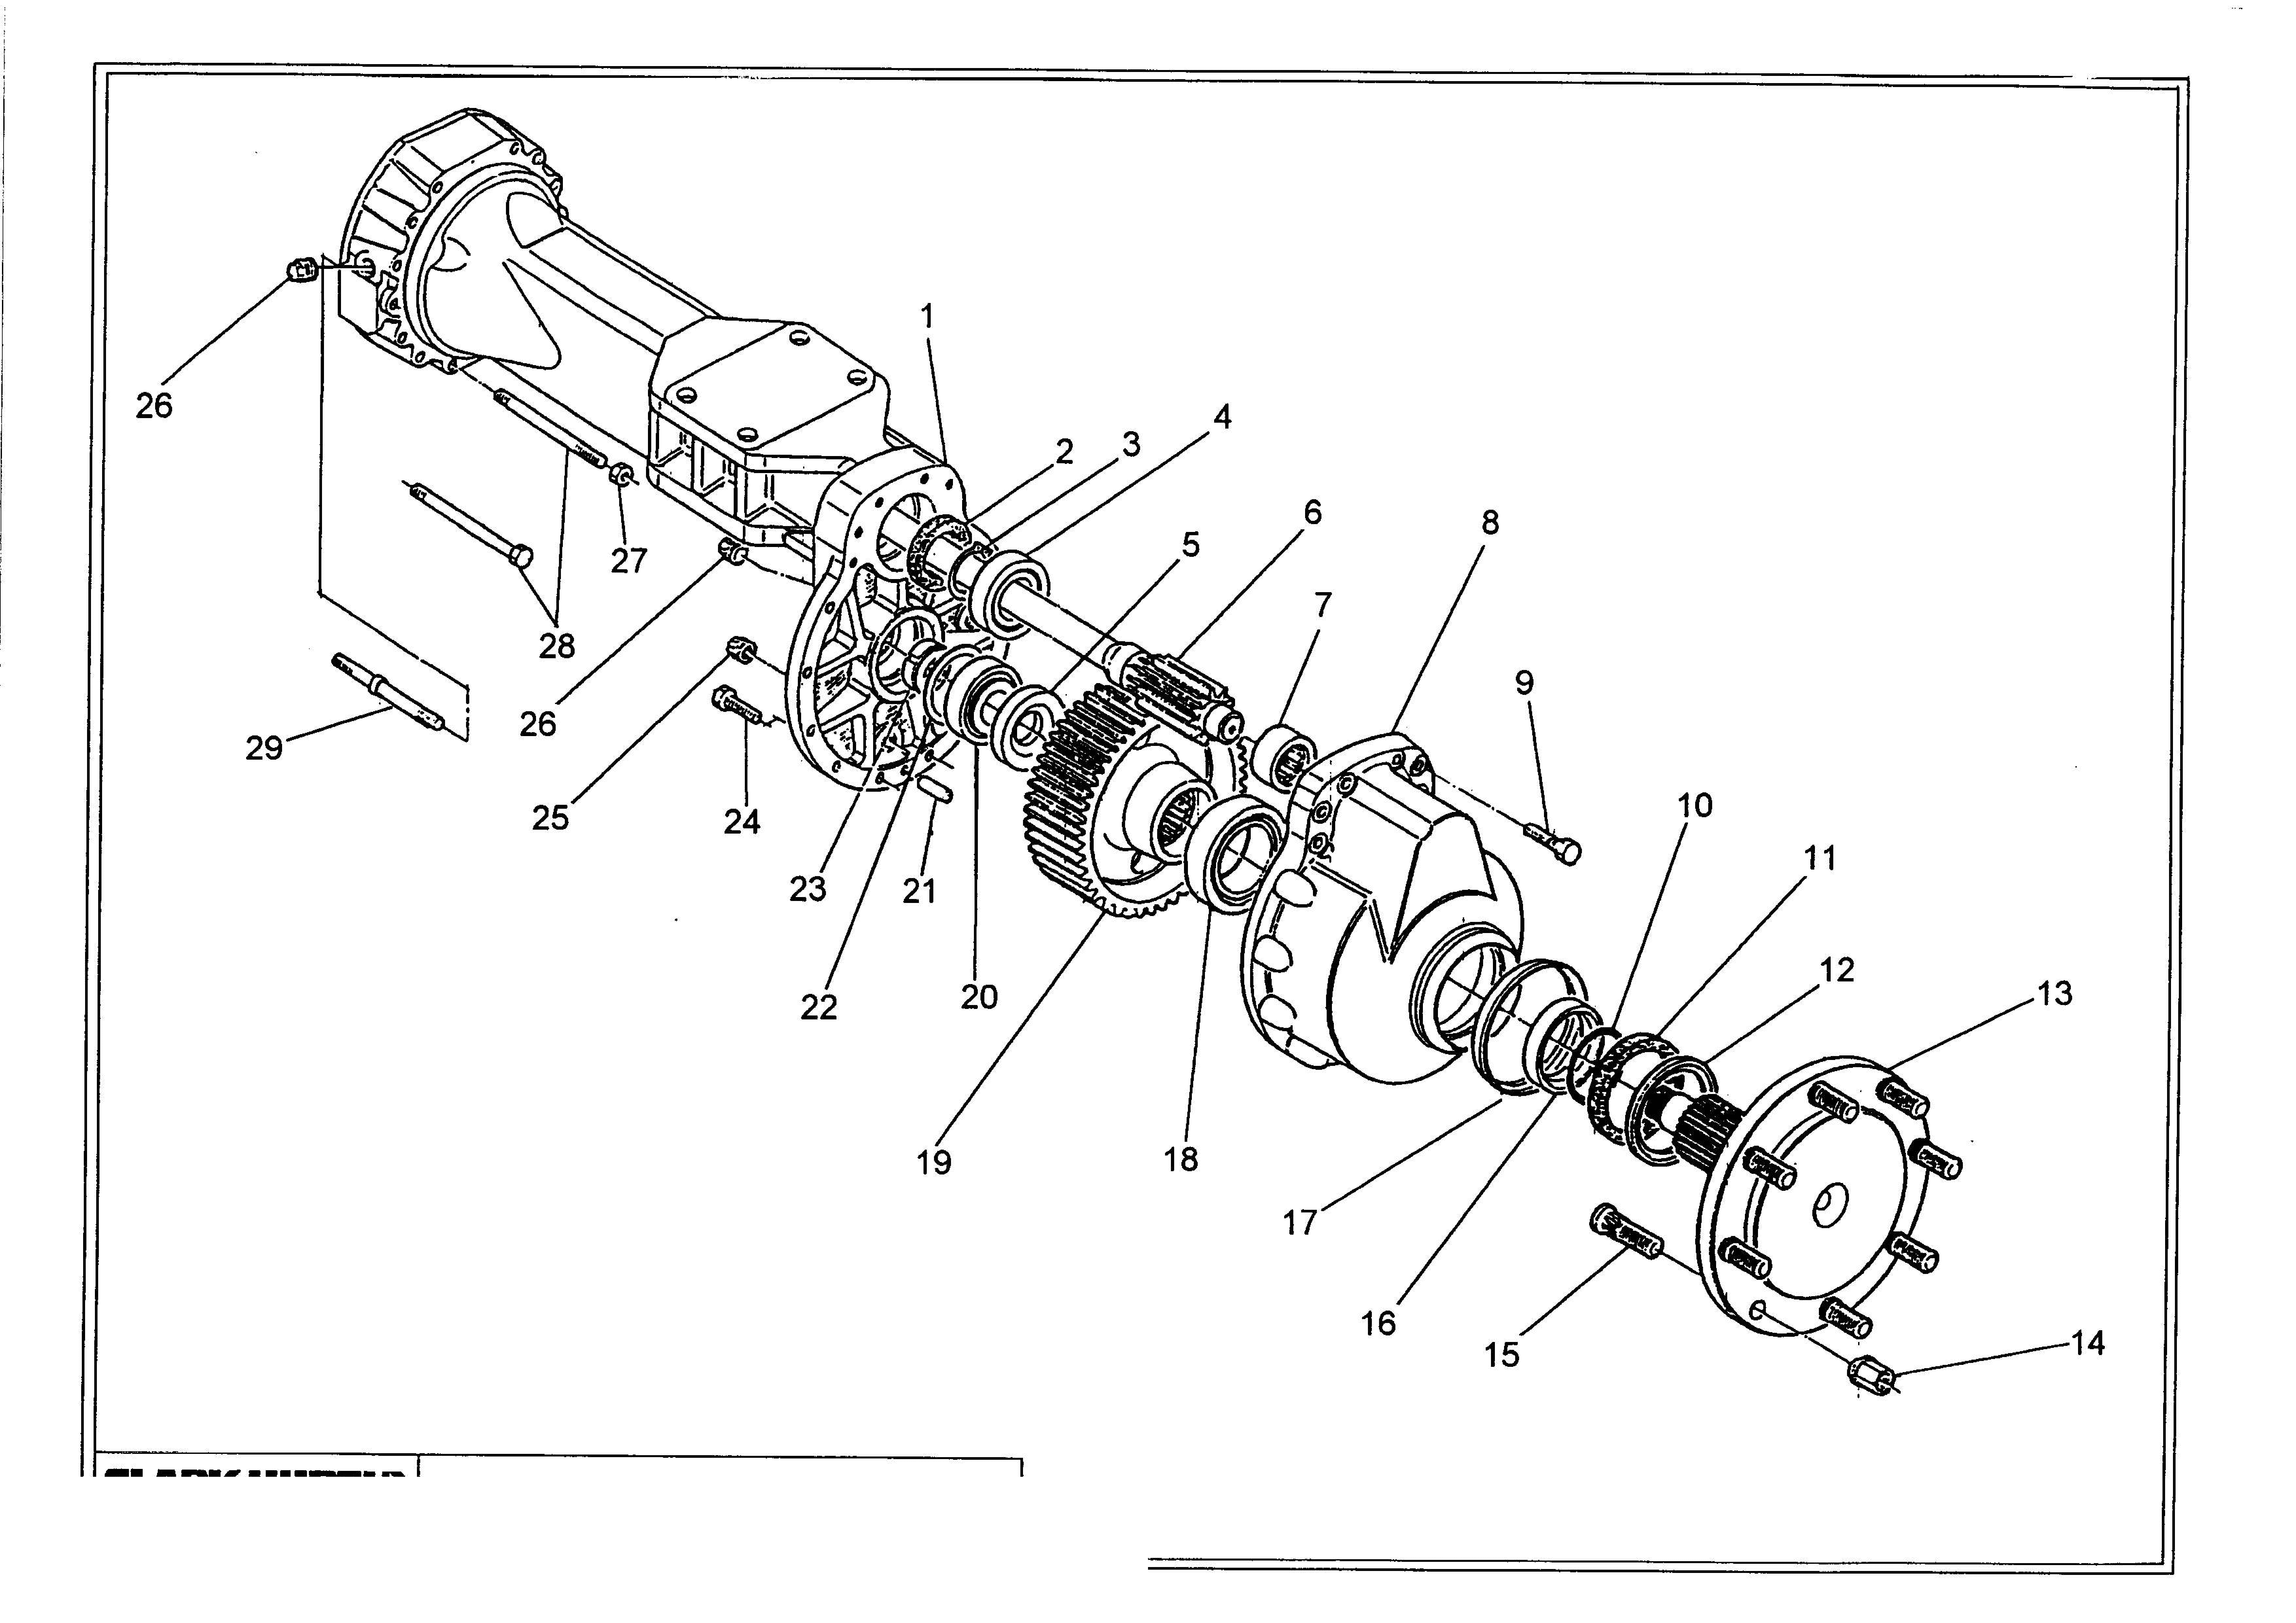 drawing for HSM HOHENLOHER 1402 - RING NUT (figure 2)